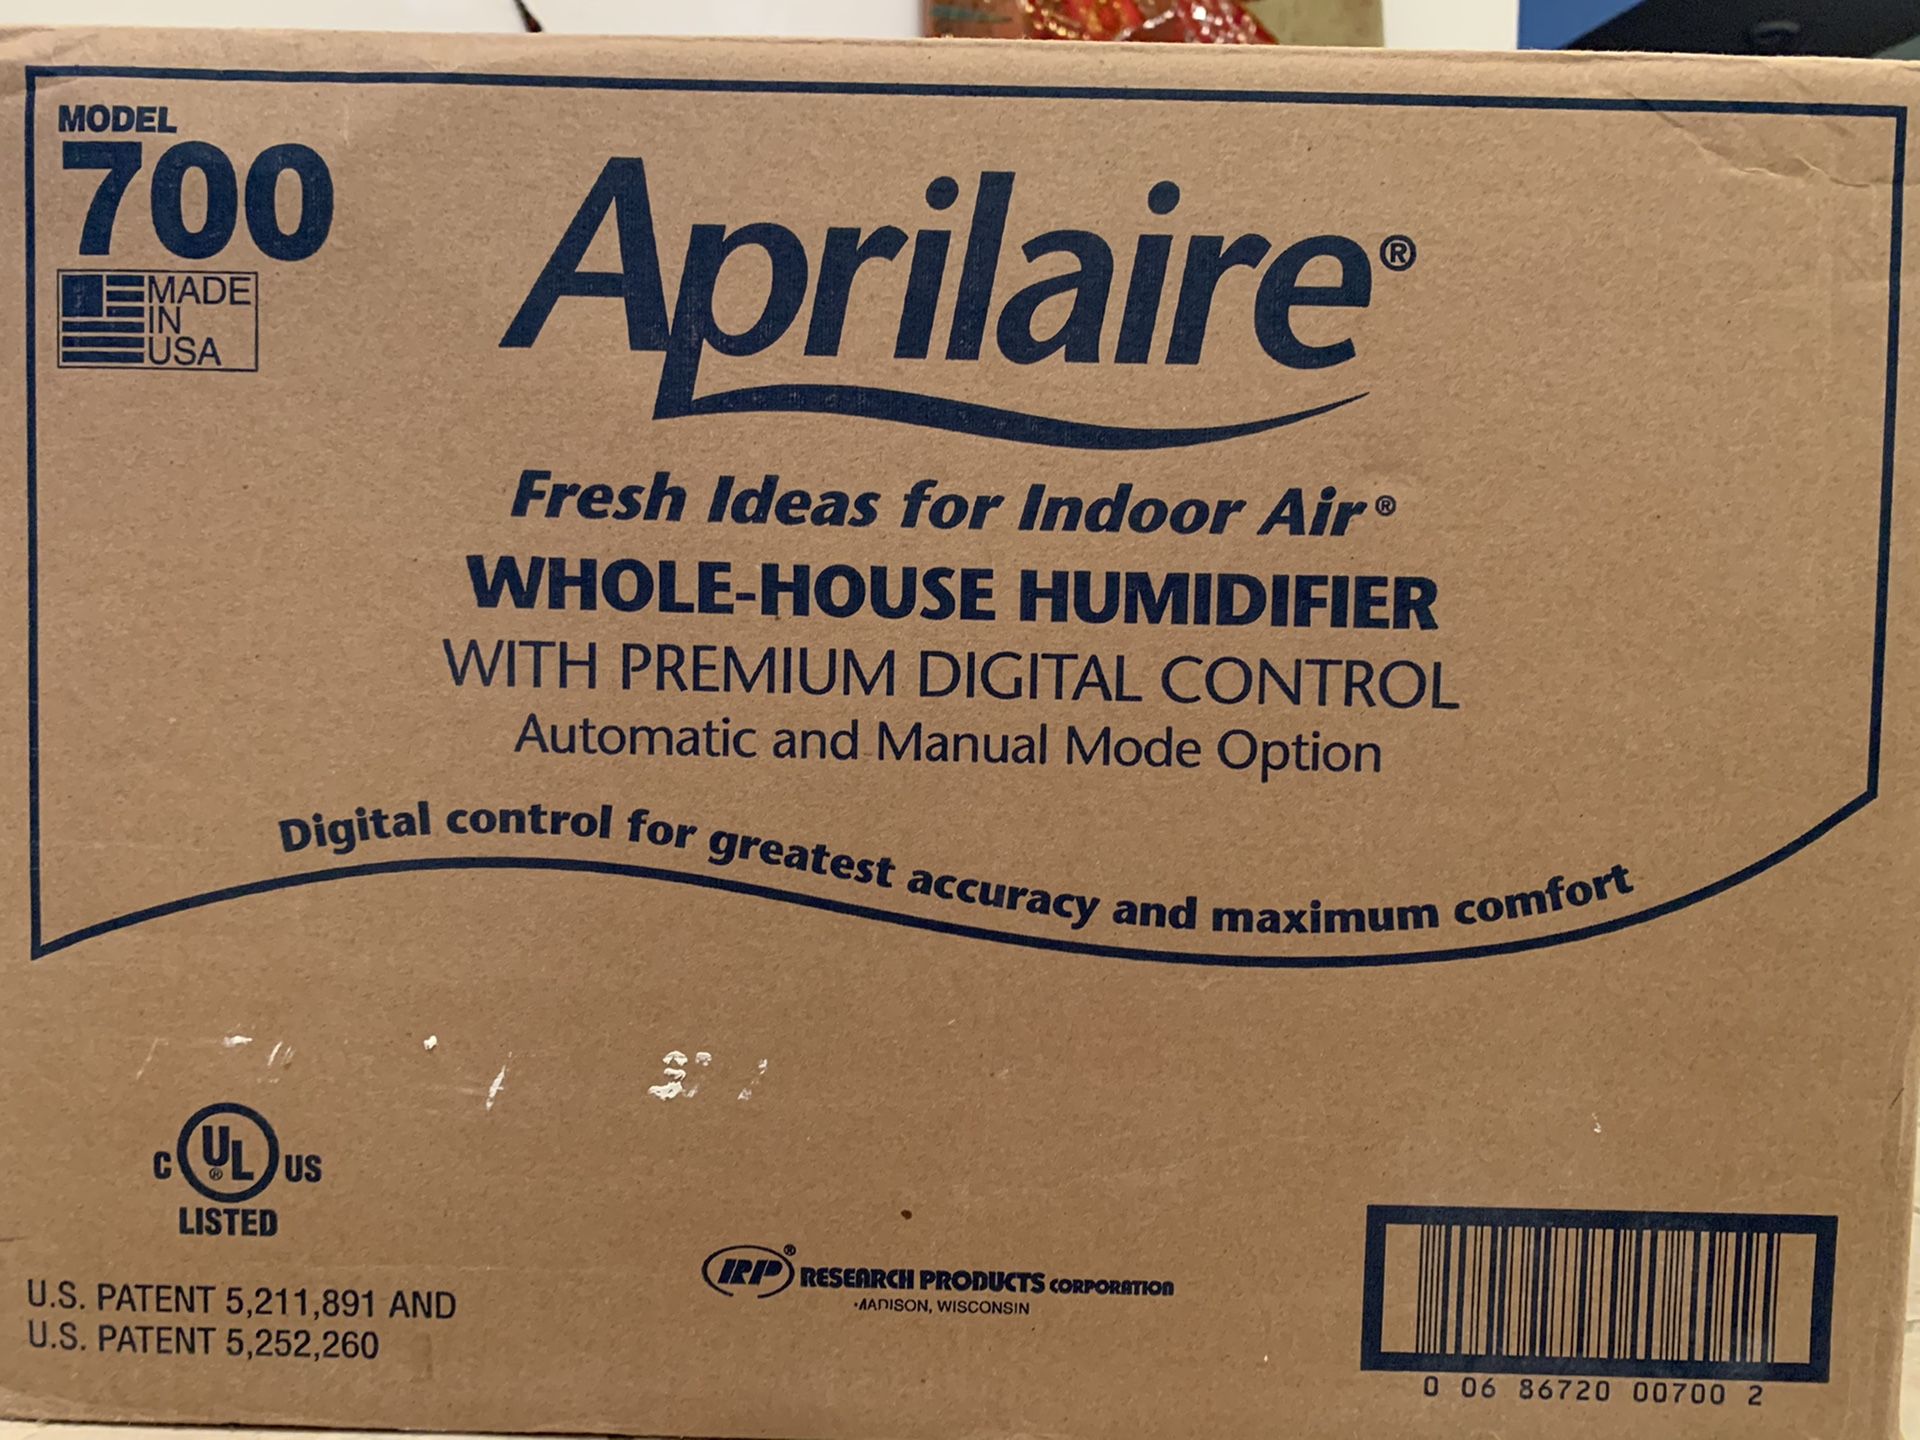 Aprilaire whole house humidifier